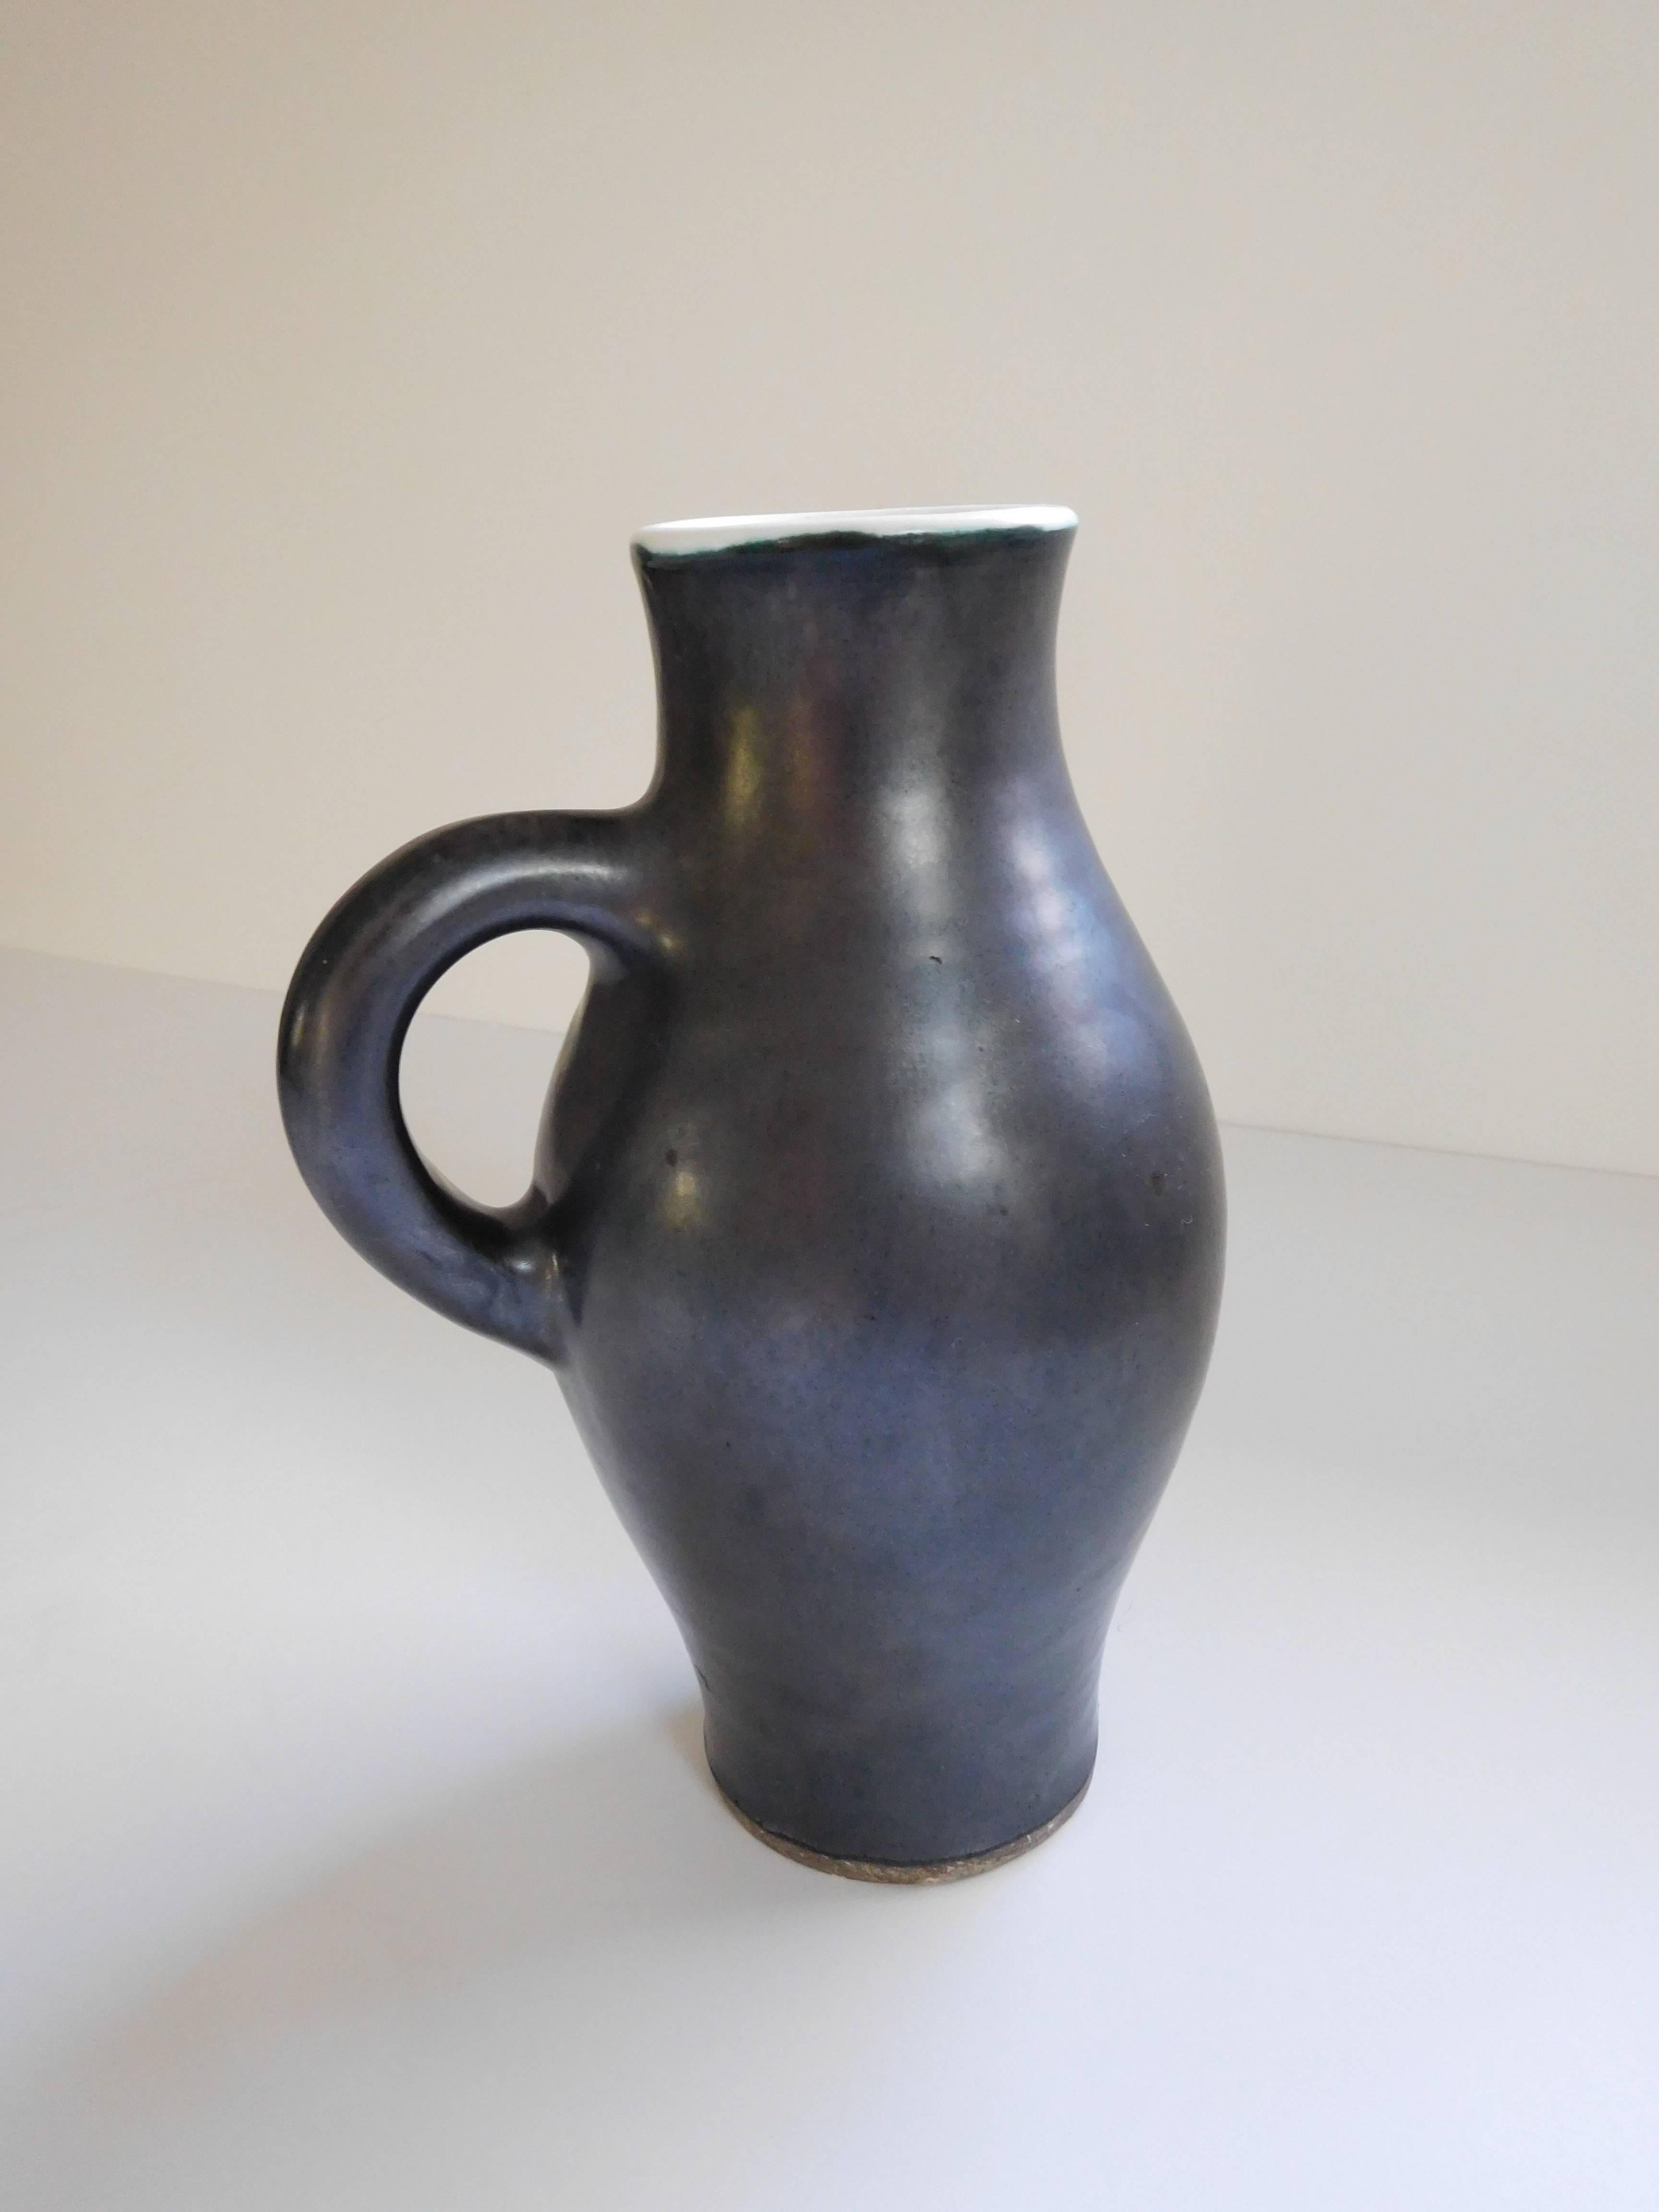 Stunning ceramic pitcher by master French potter, Georges Jouve. This is an excellent example of his work.